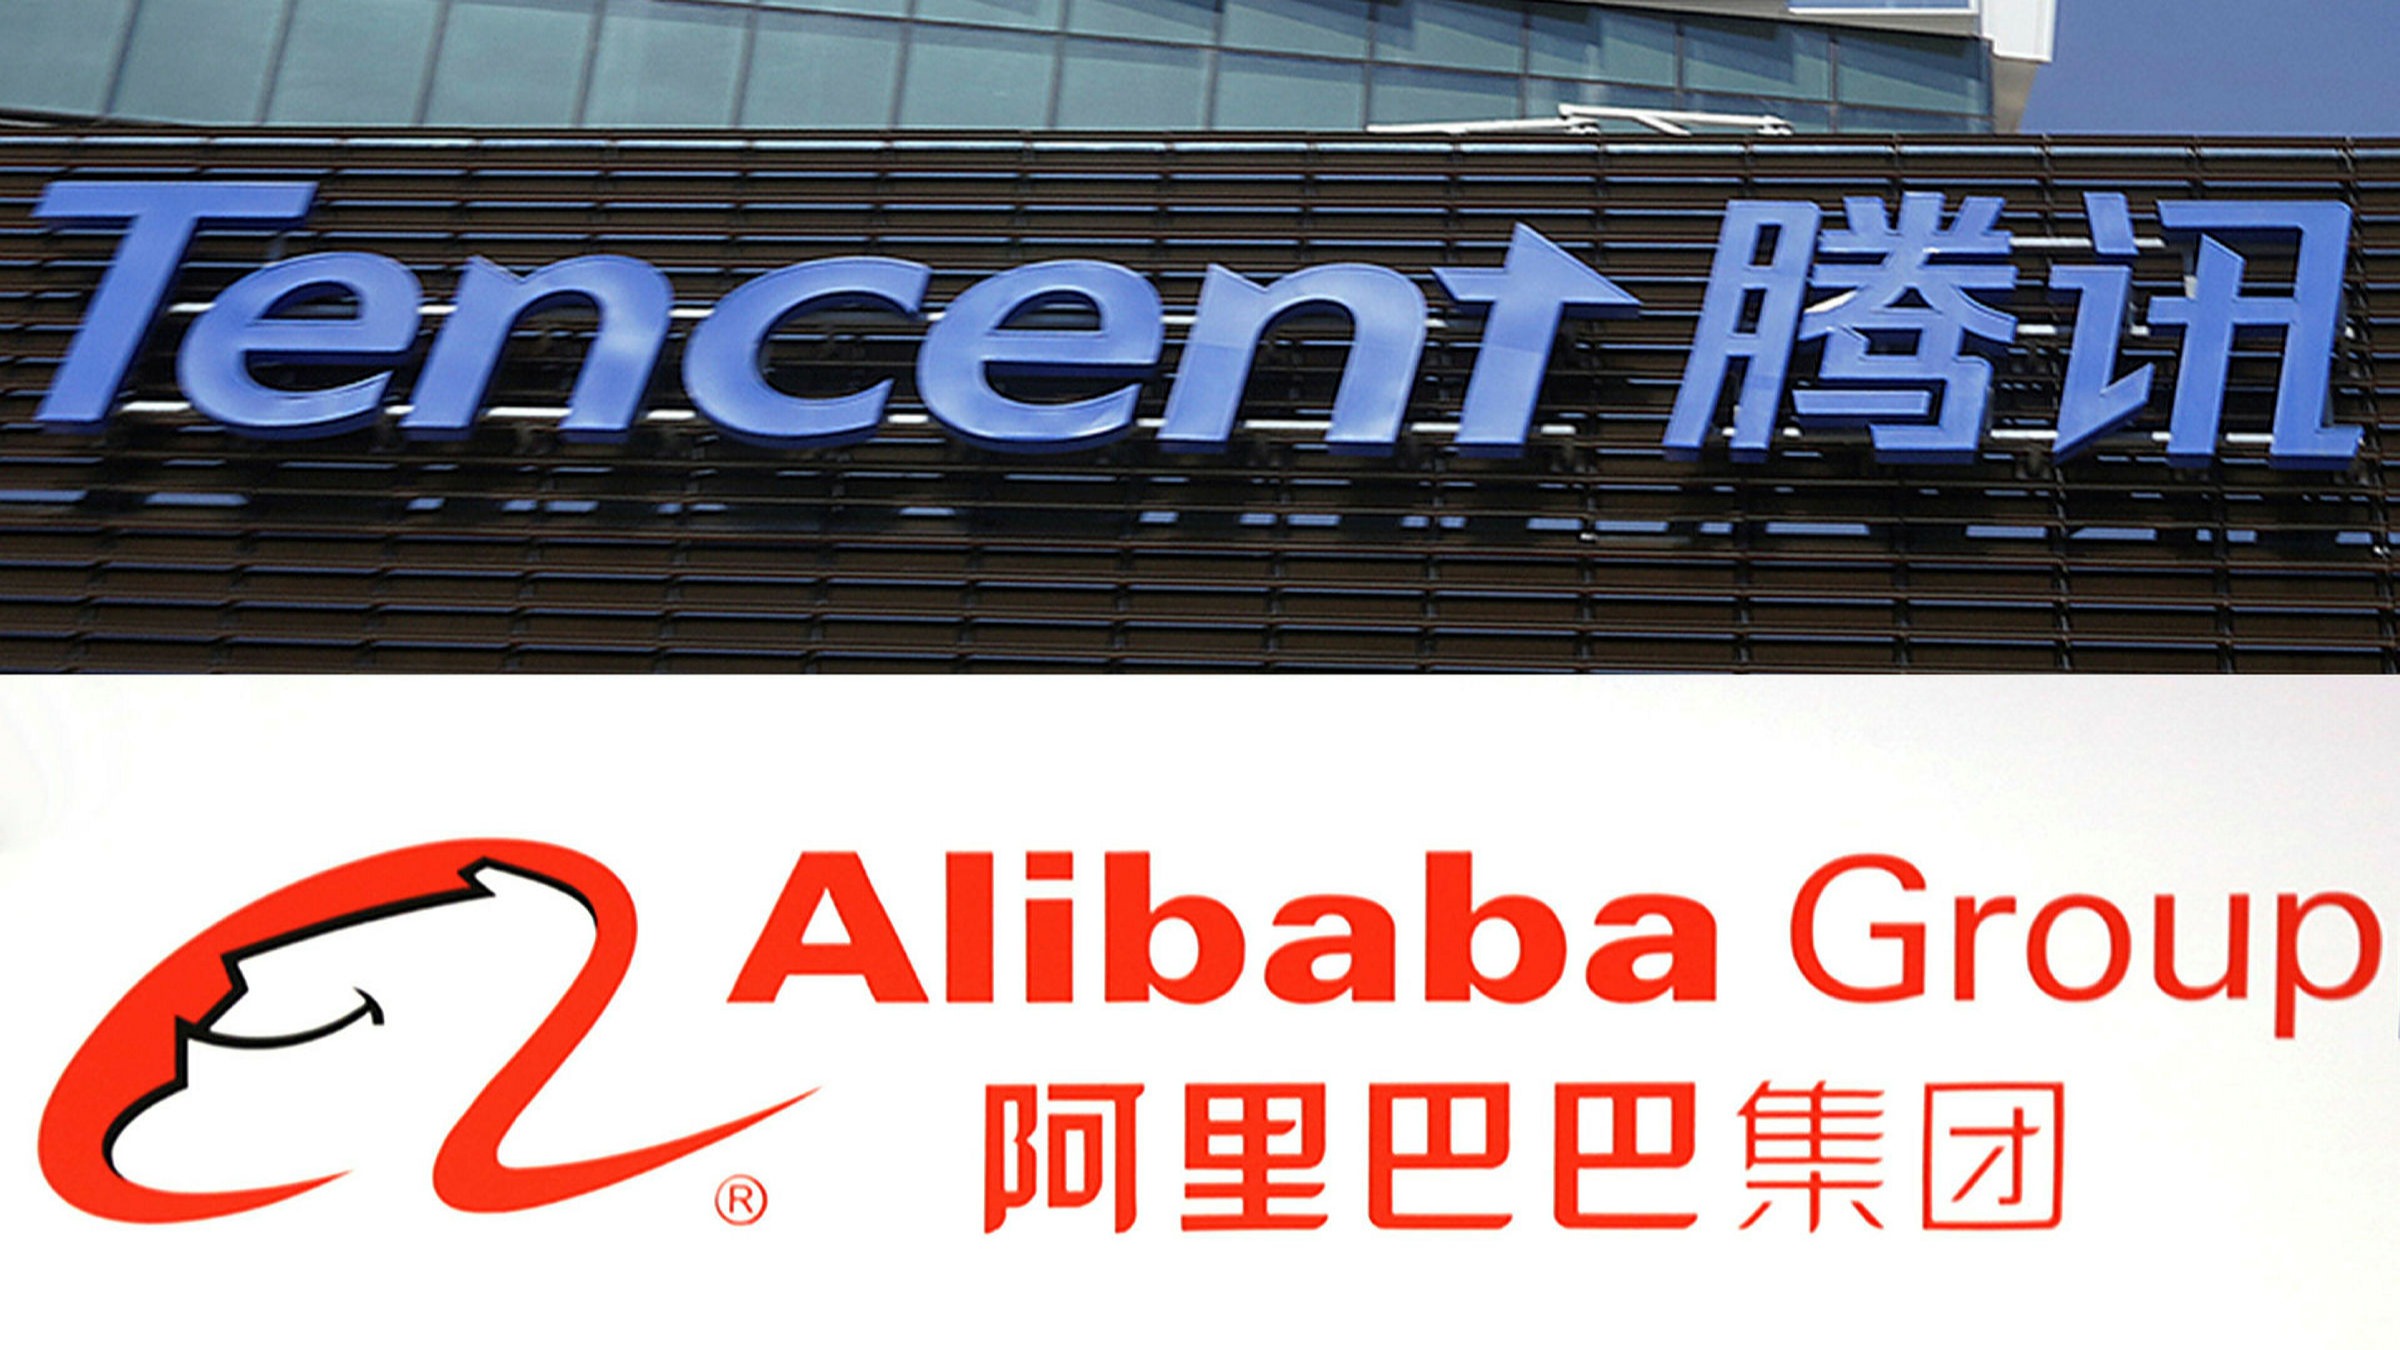 Tencent spent more than Alibaba on start-ups in 2020 | Financial Times